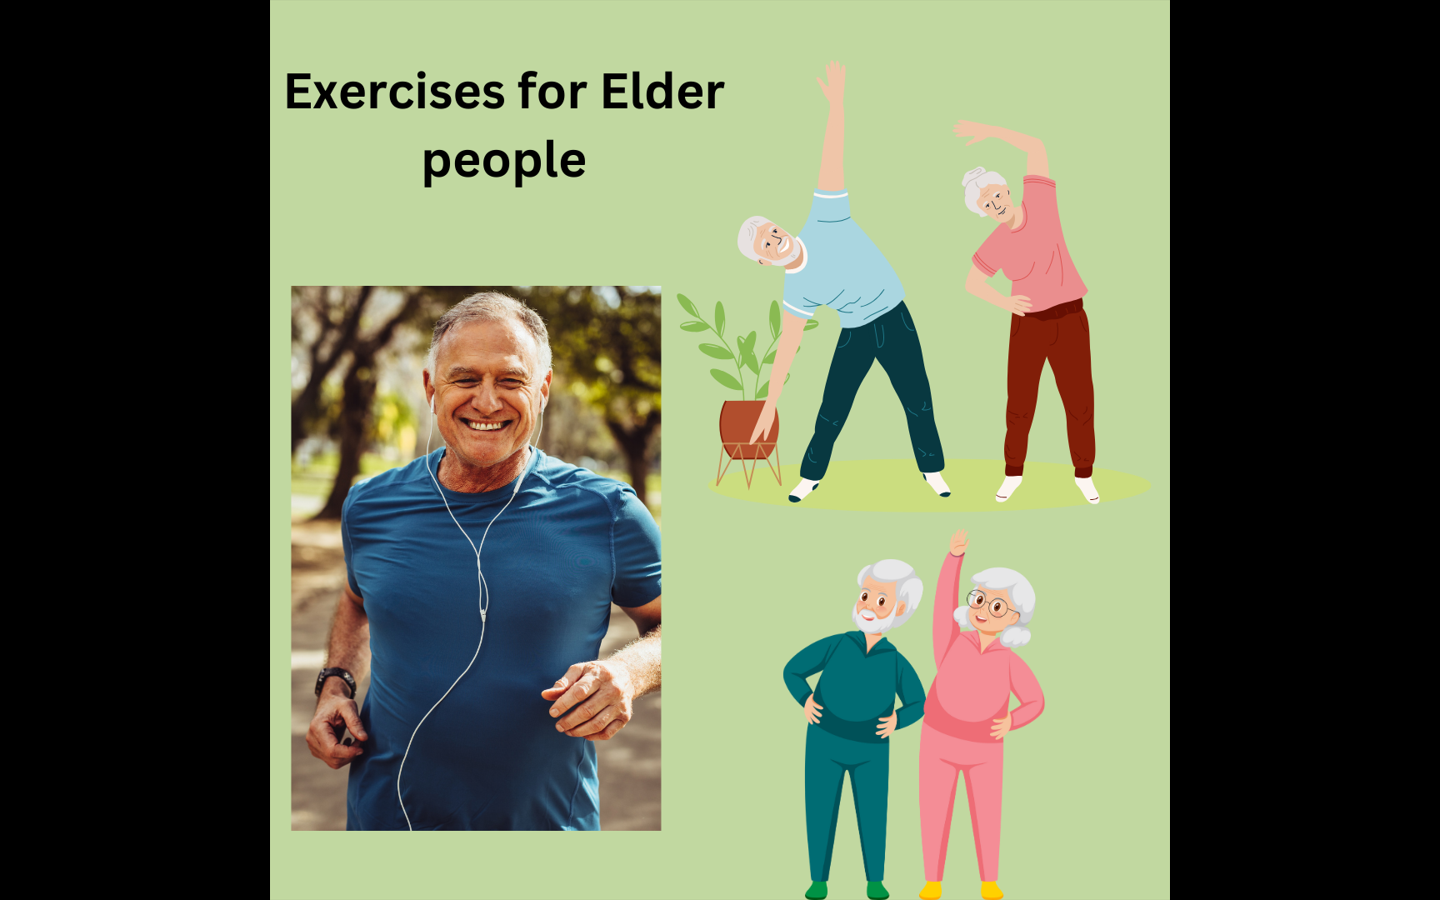 Seniors with Limited Mobility and Exercises